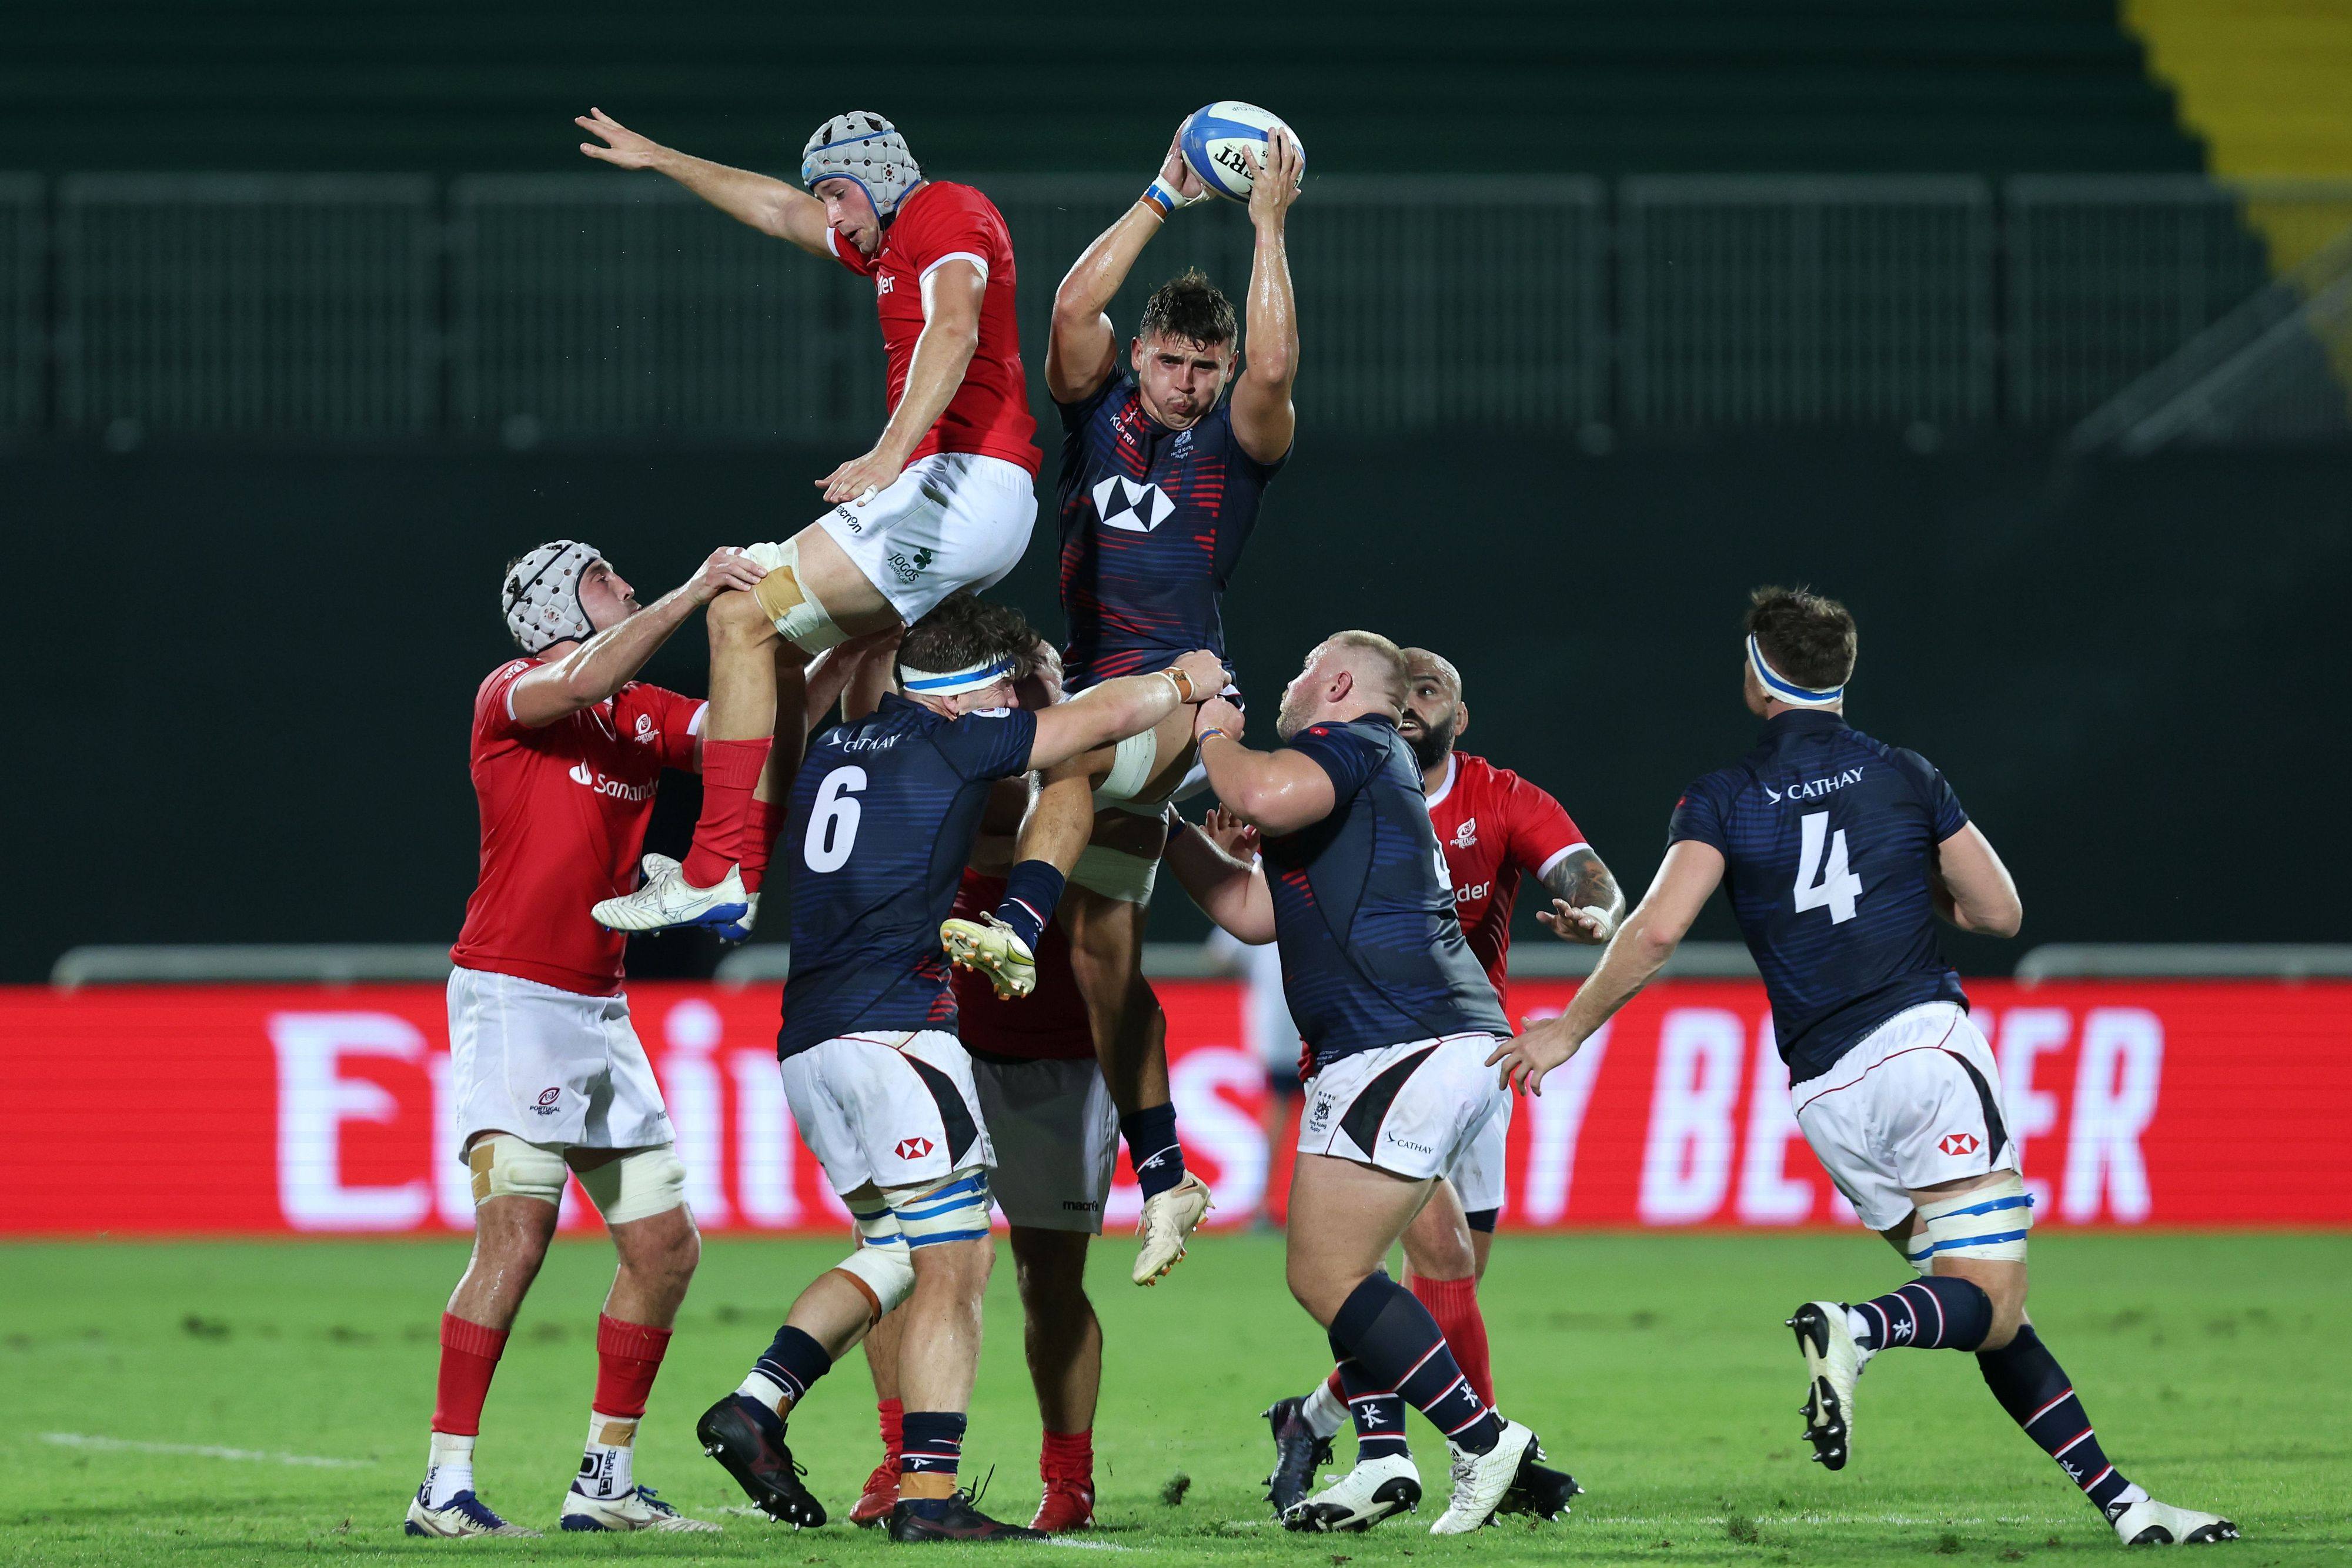 David Carvalho of Portugal loses out to James Sawyer of Hong Kong at the lineout during the 2023 Rugby World Cup Final Qualifying Tournament. Photo: World Rugby